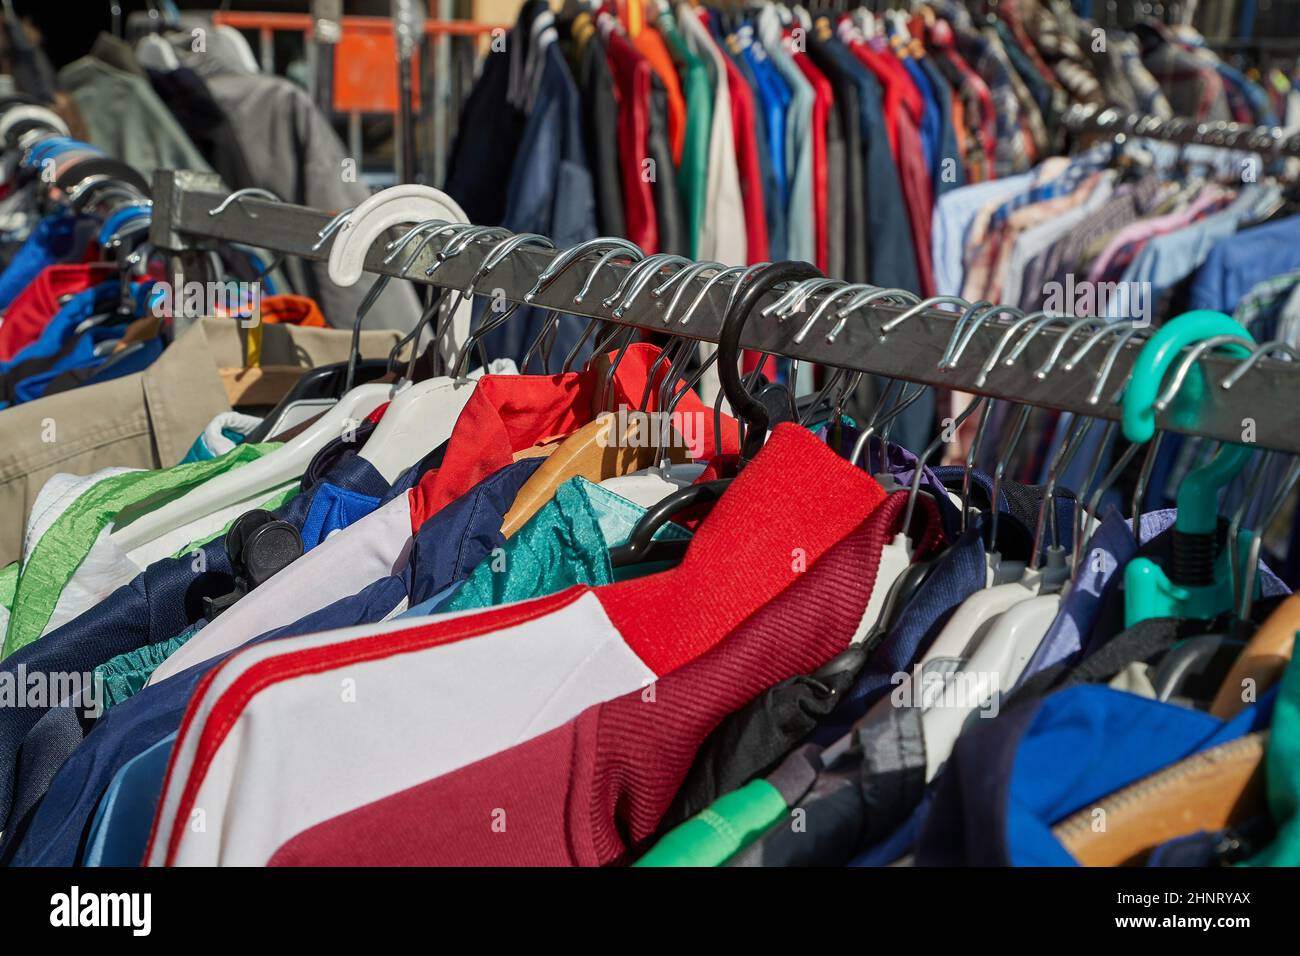 Selling used clothes at a market Stock Photo